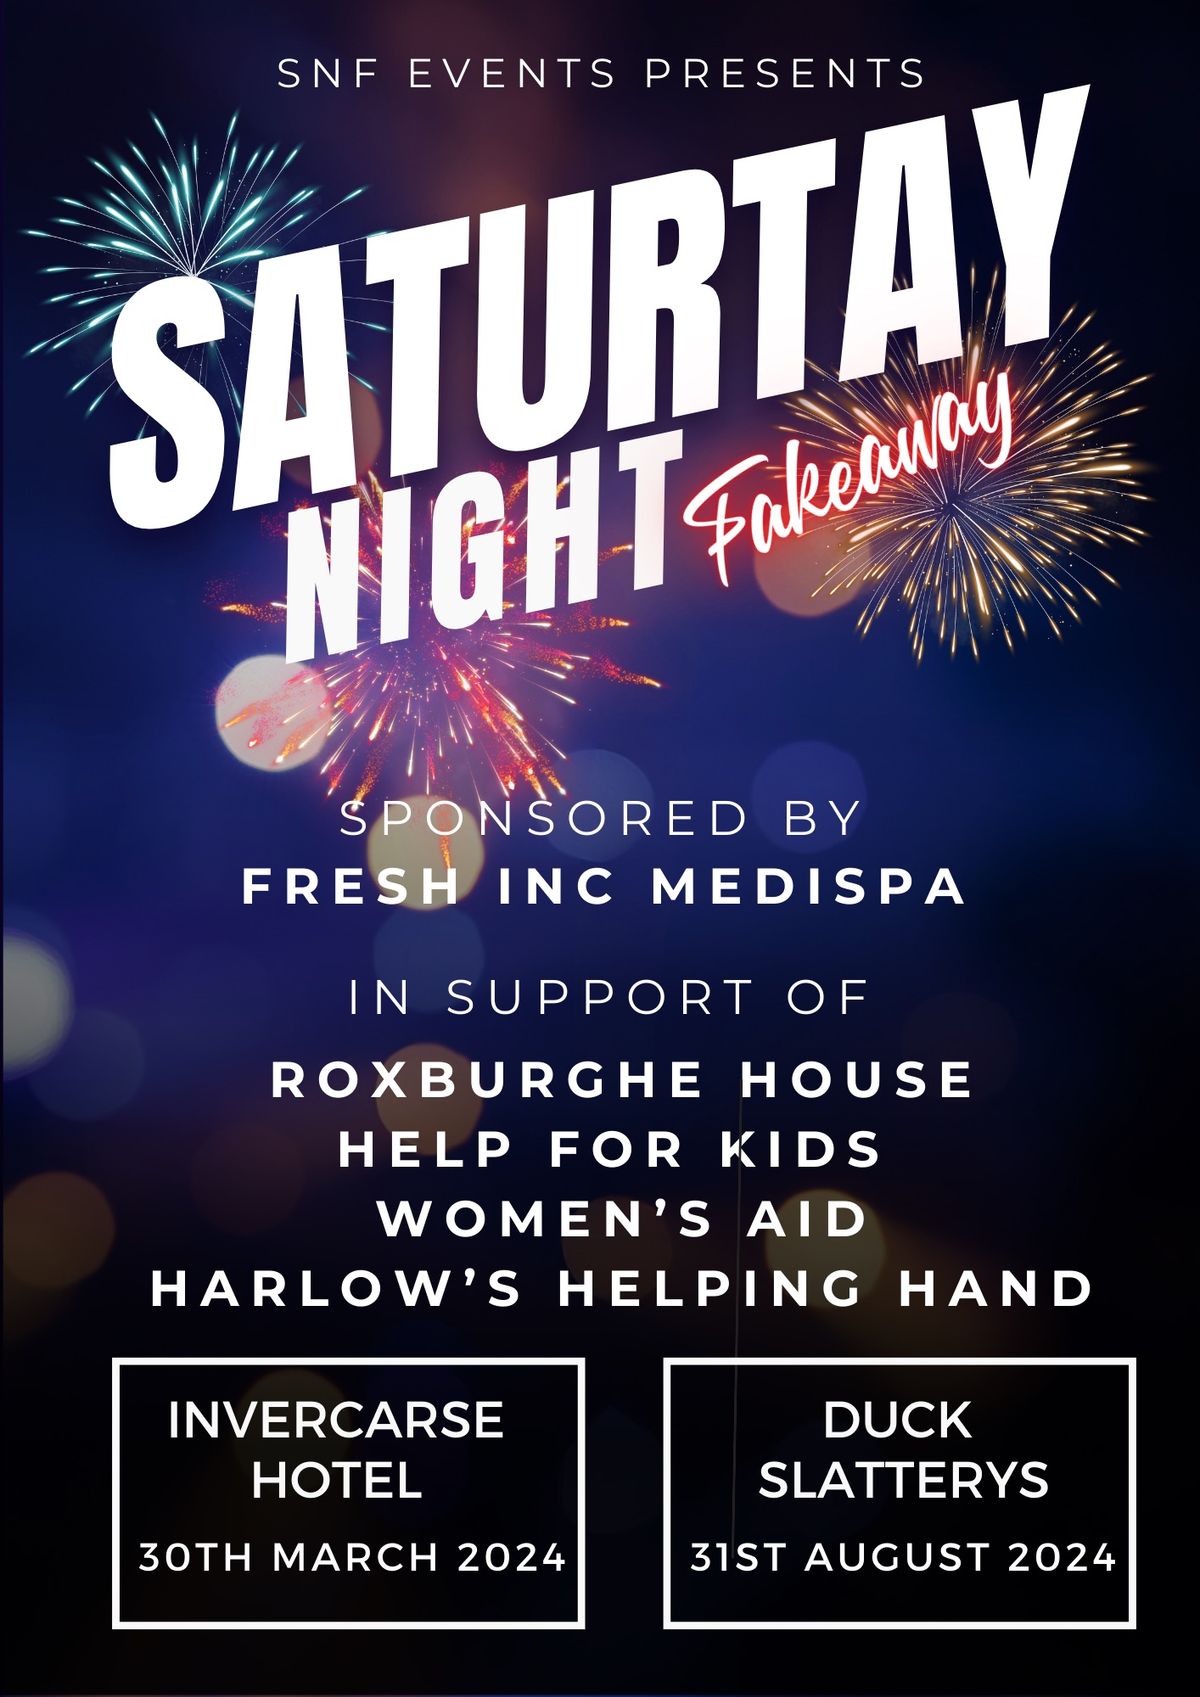 SaturTay Night Fakeaway:The Party! 